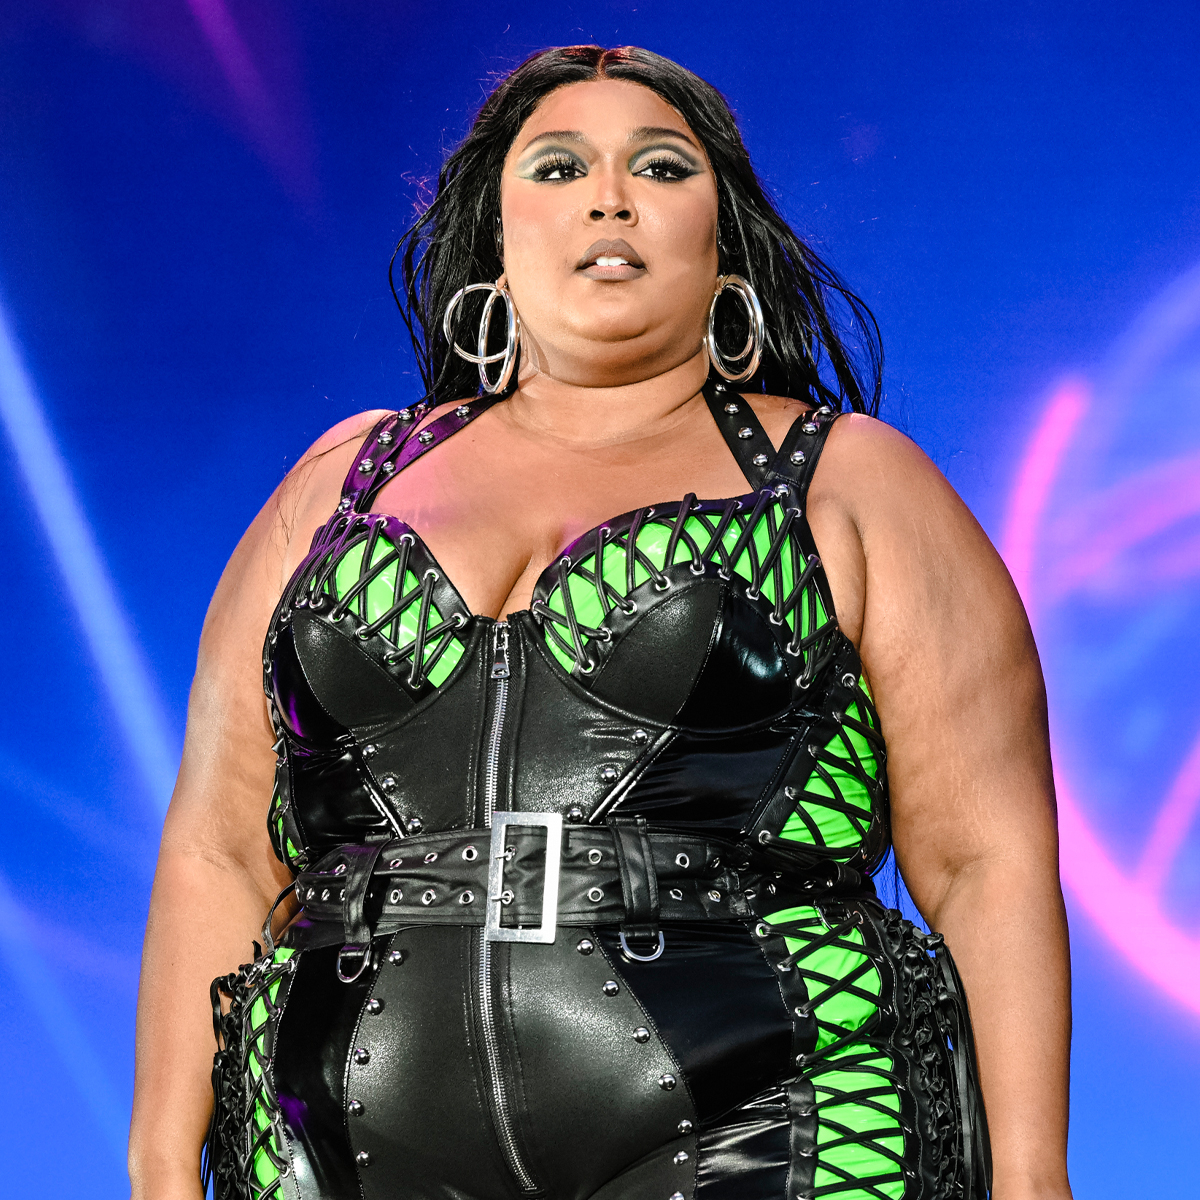 Lizzo Quits Music Industry Due to Online Ridicule